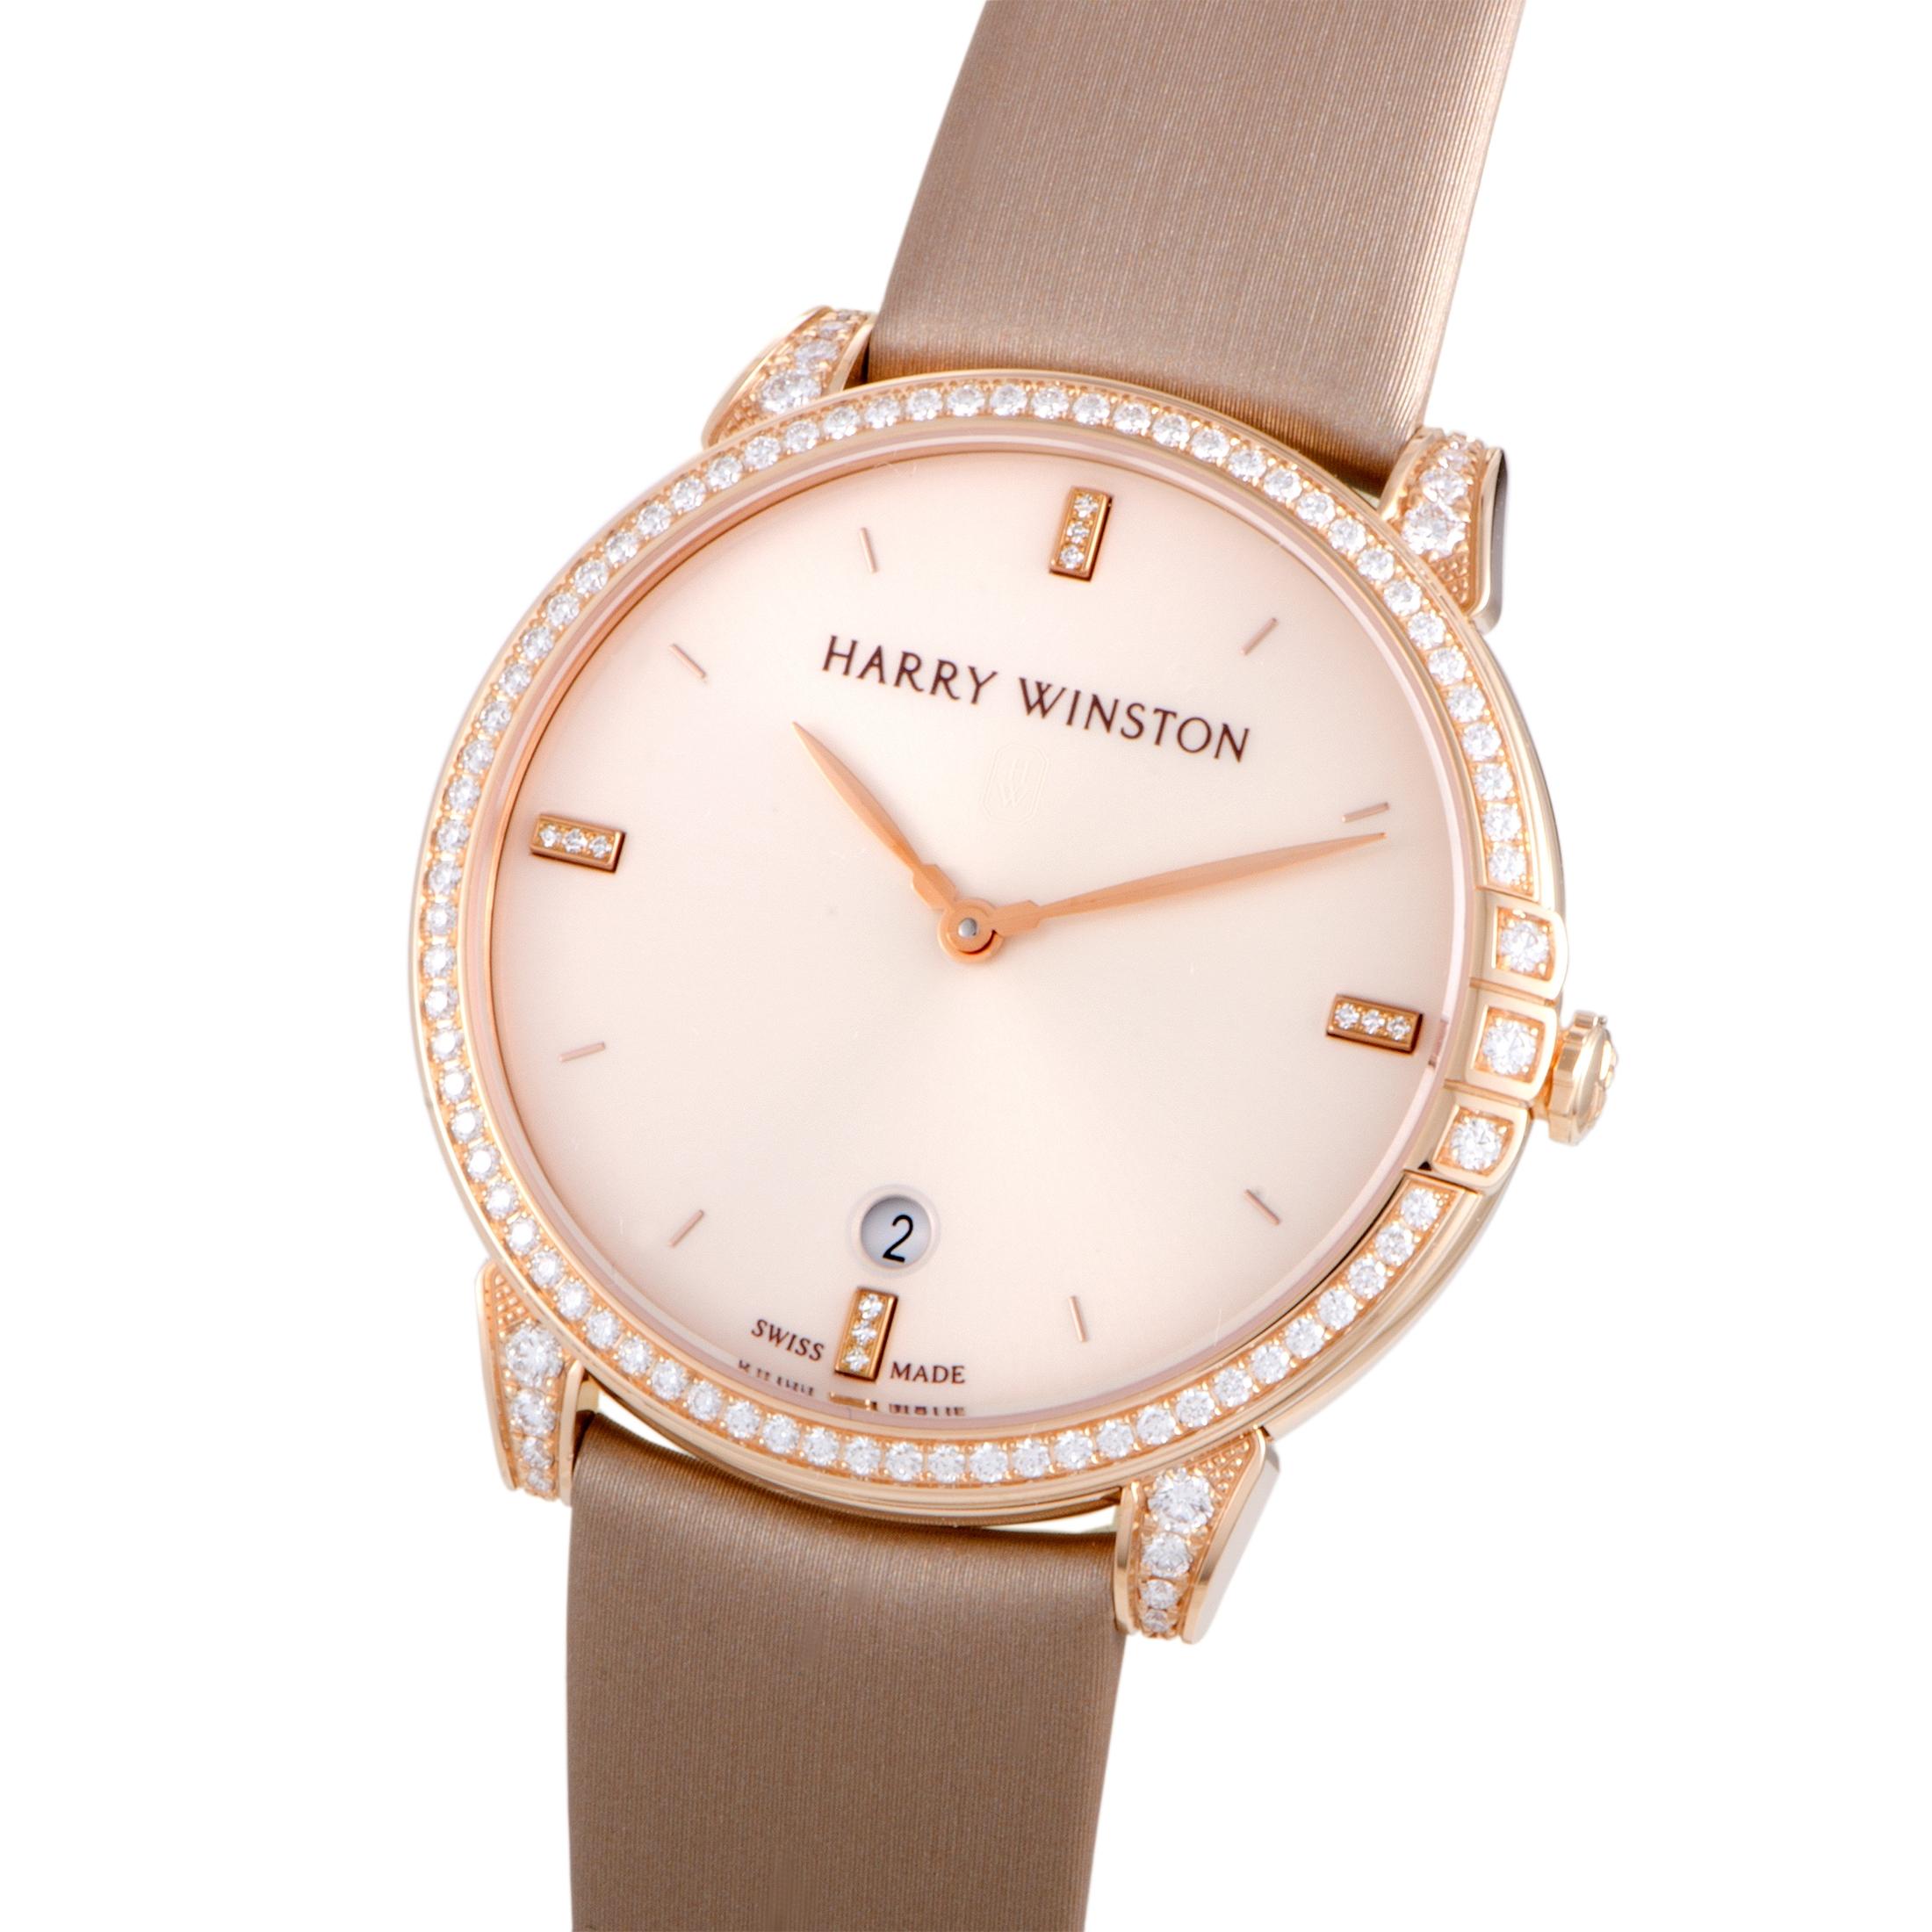 Brilliantly capturing the very essence of the brand’s timeless style, this enchanting timepiece from Harry Winston boasts an appearance of delightful femininity and gentle elegance while also providing a slight dash of charming diamond luster. The